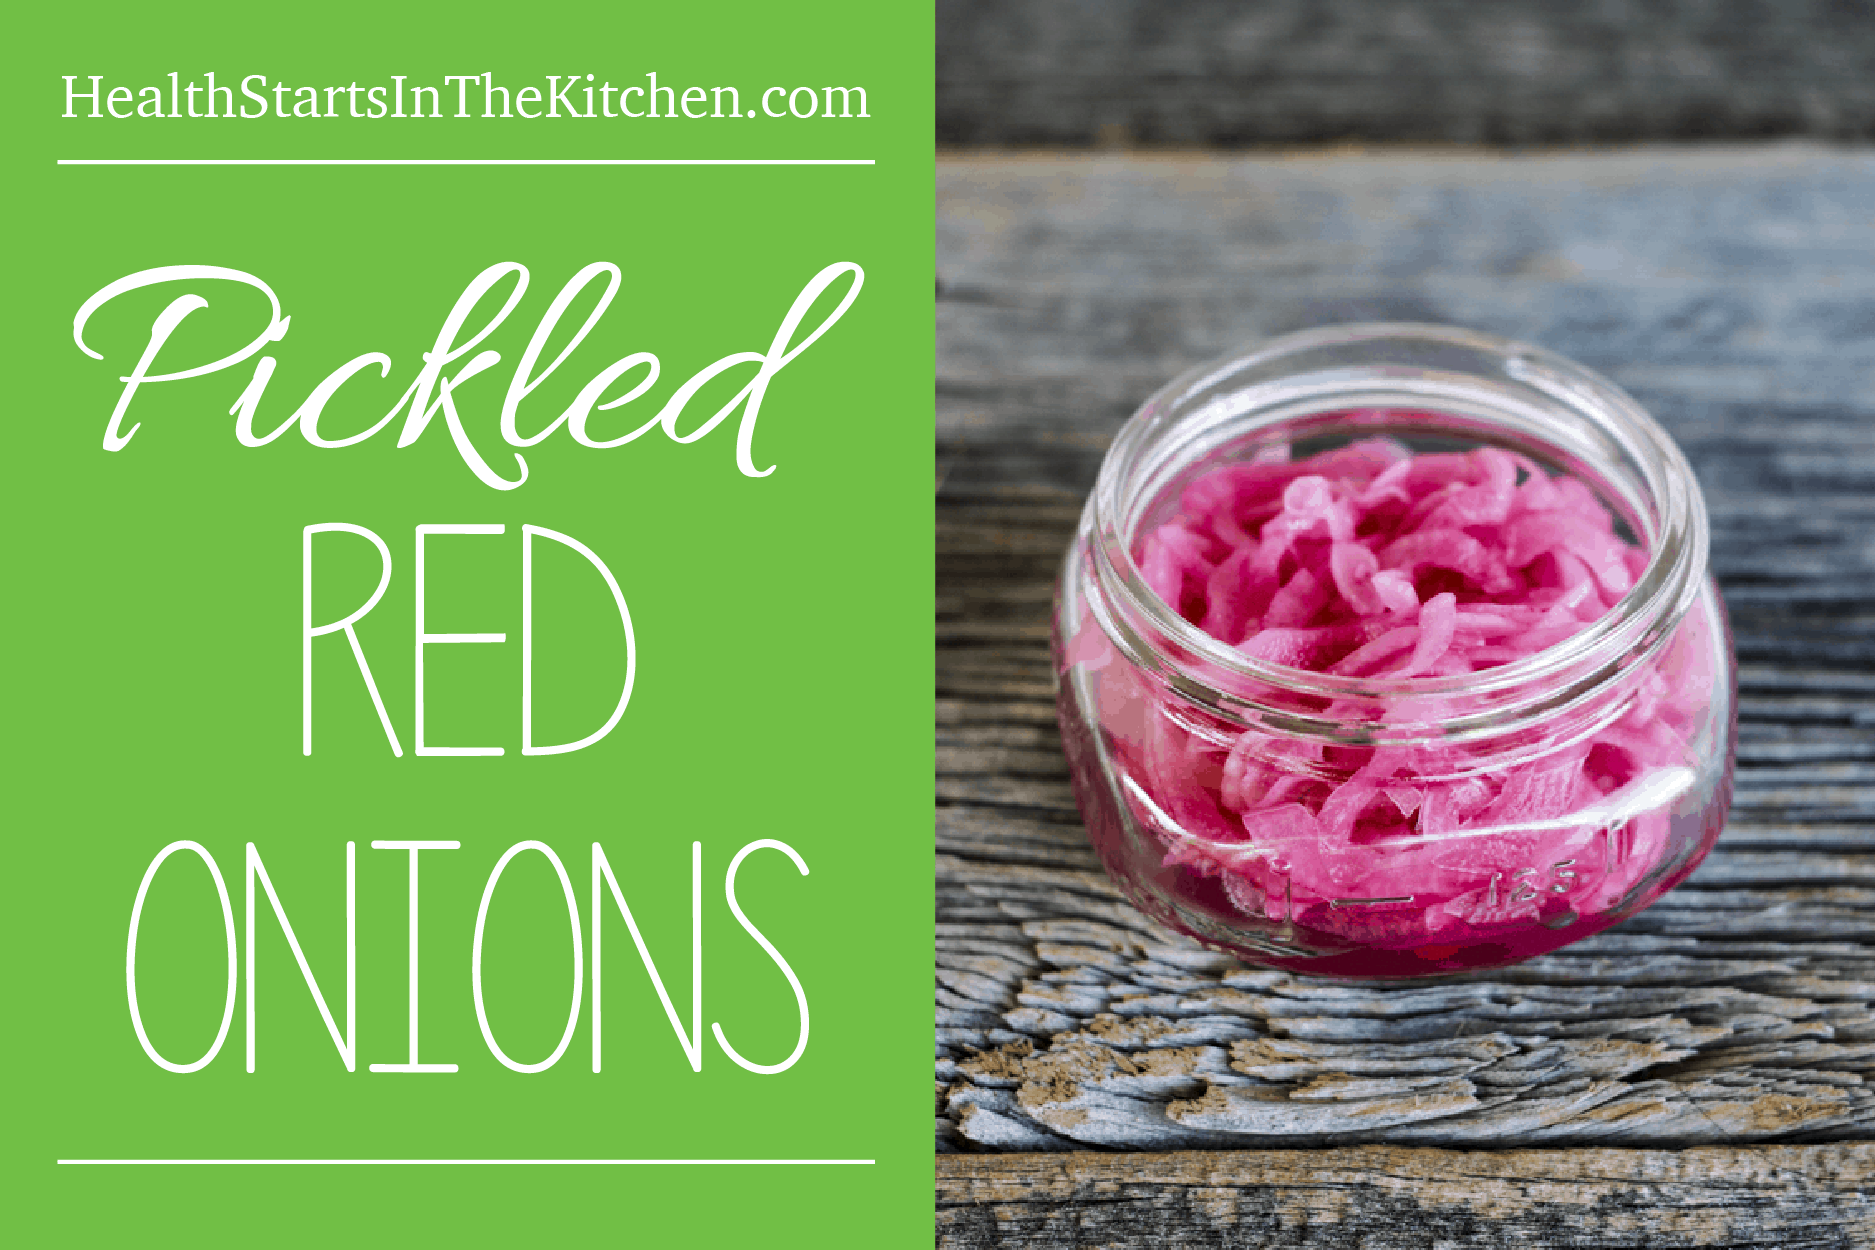 Homemade Pickled Onions. These are AMAZING, made with just a few simple ingredients and ready in 6 hours! 